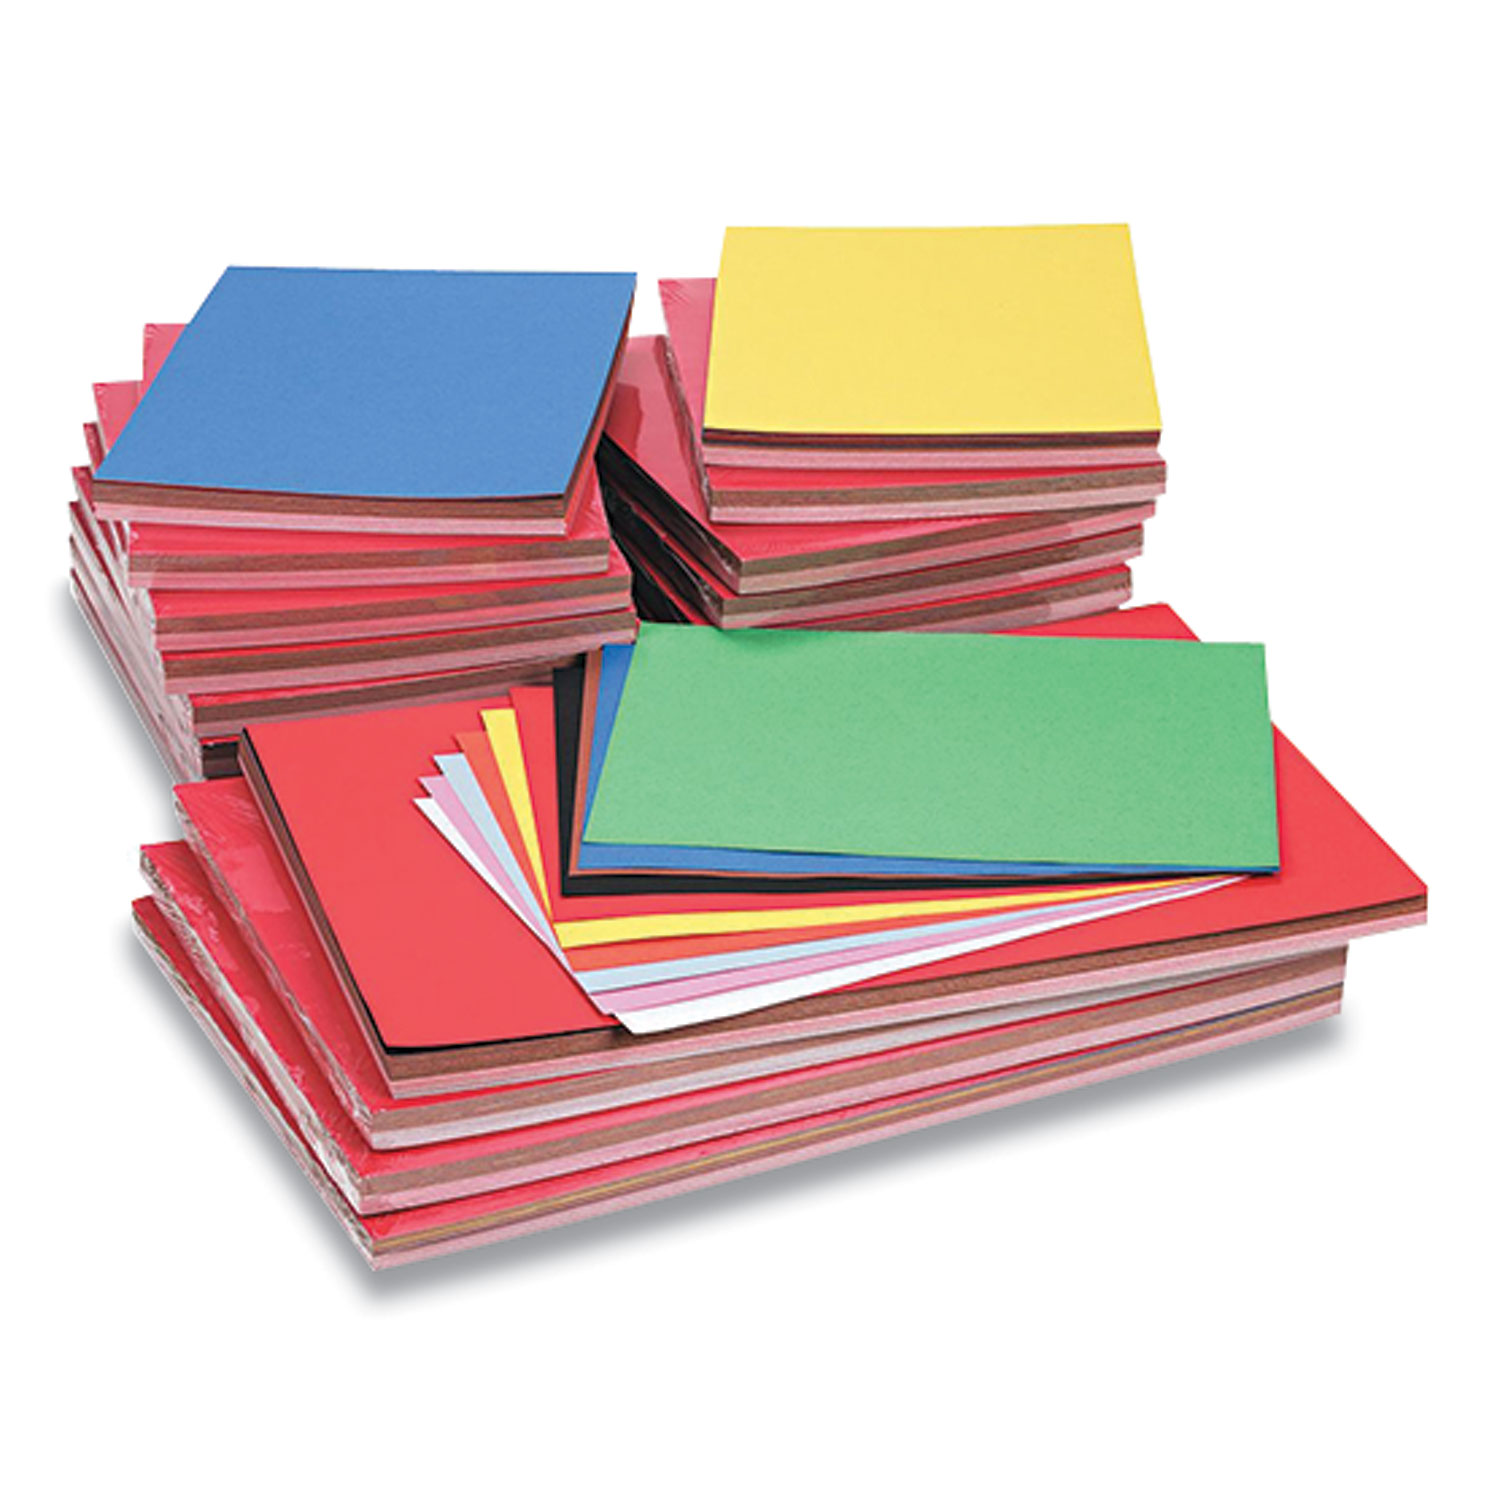  Pacon 104121 Riverside Construction Paper, 76 lb, 16 Packs of 9 x 12 and 4 Packs of 12 x 18, 100 Sheets/Pack (RIV412640) 